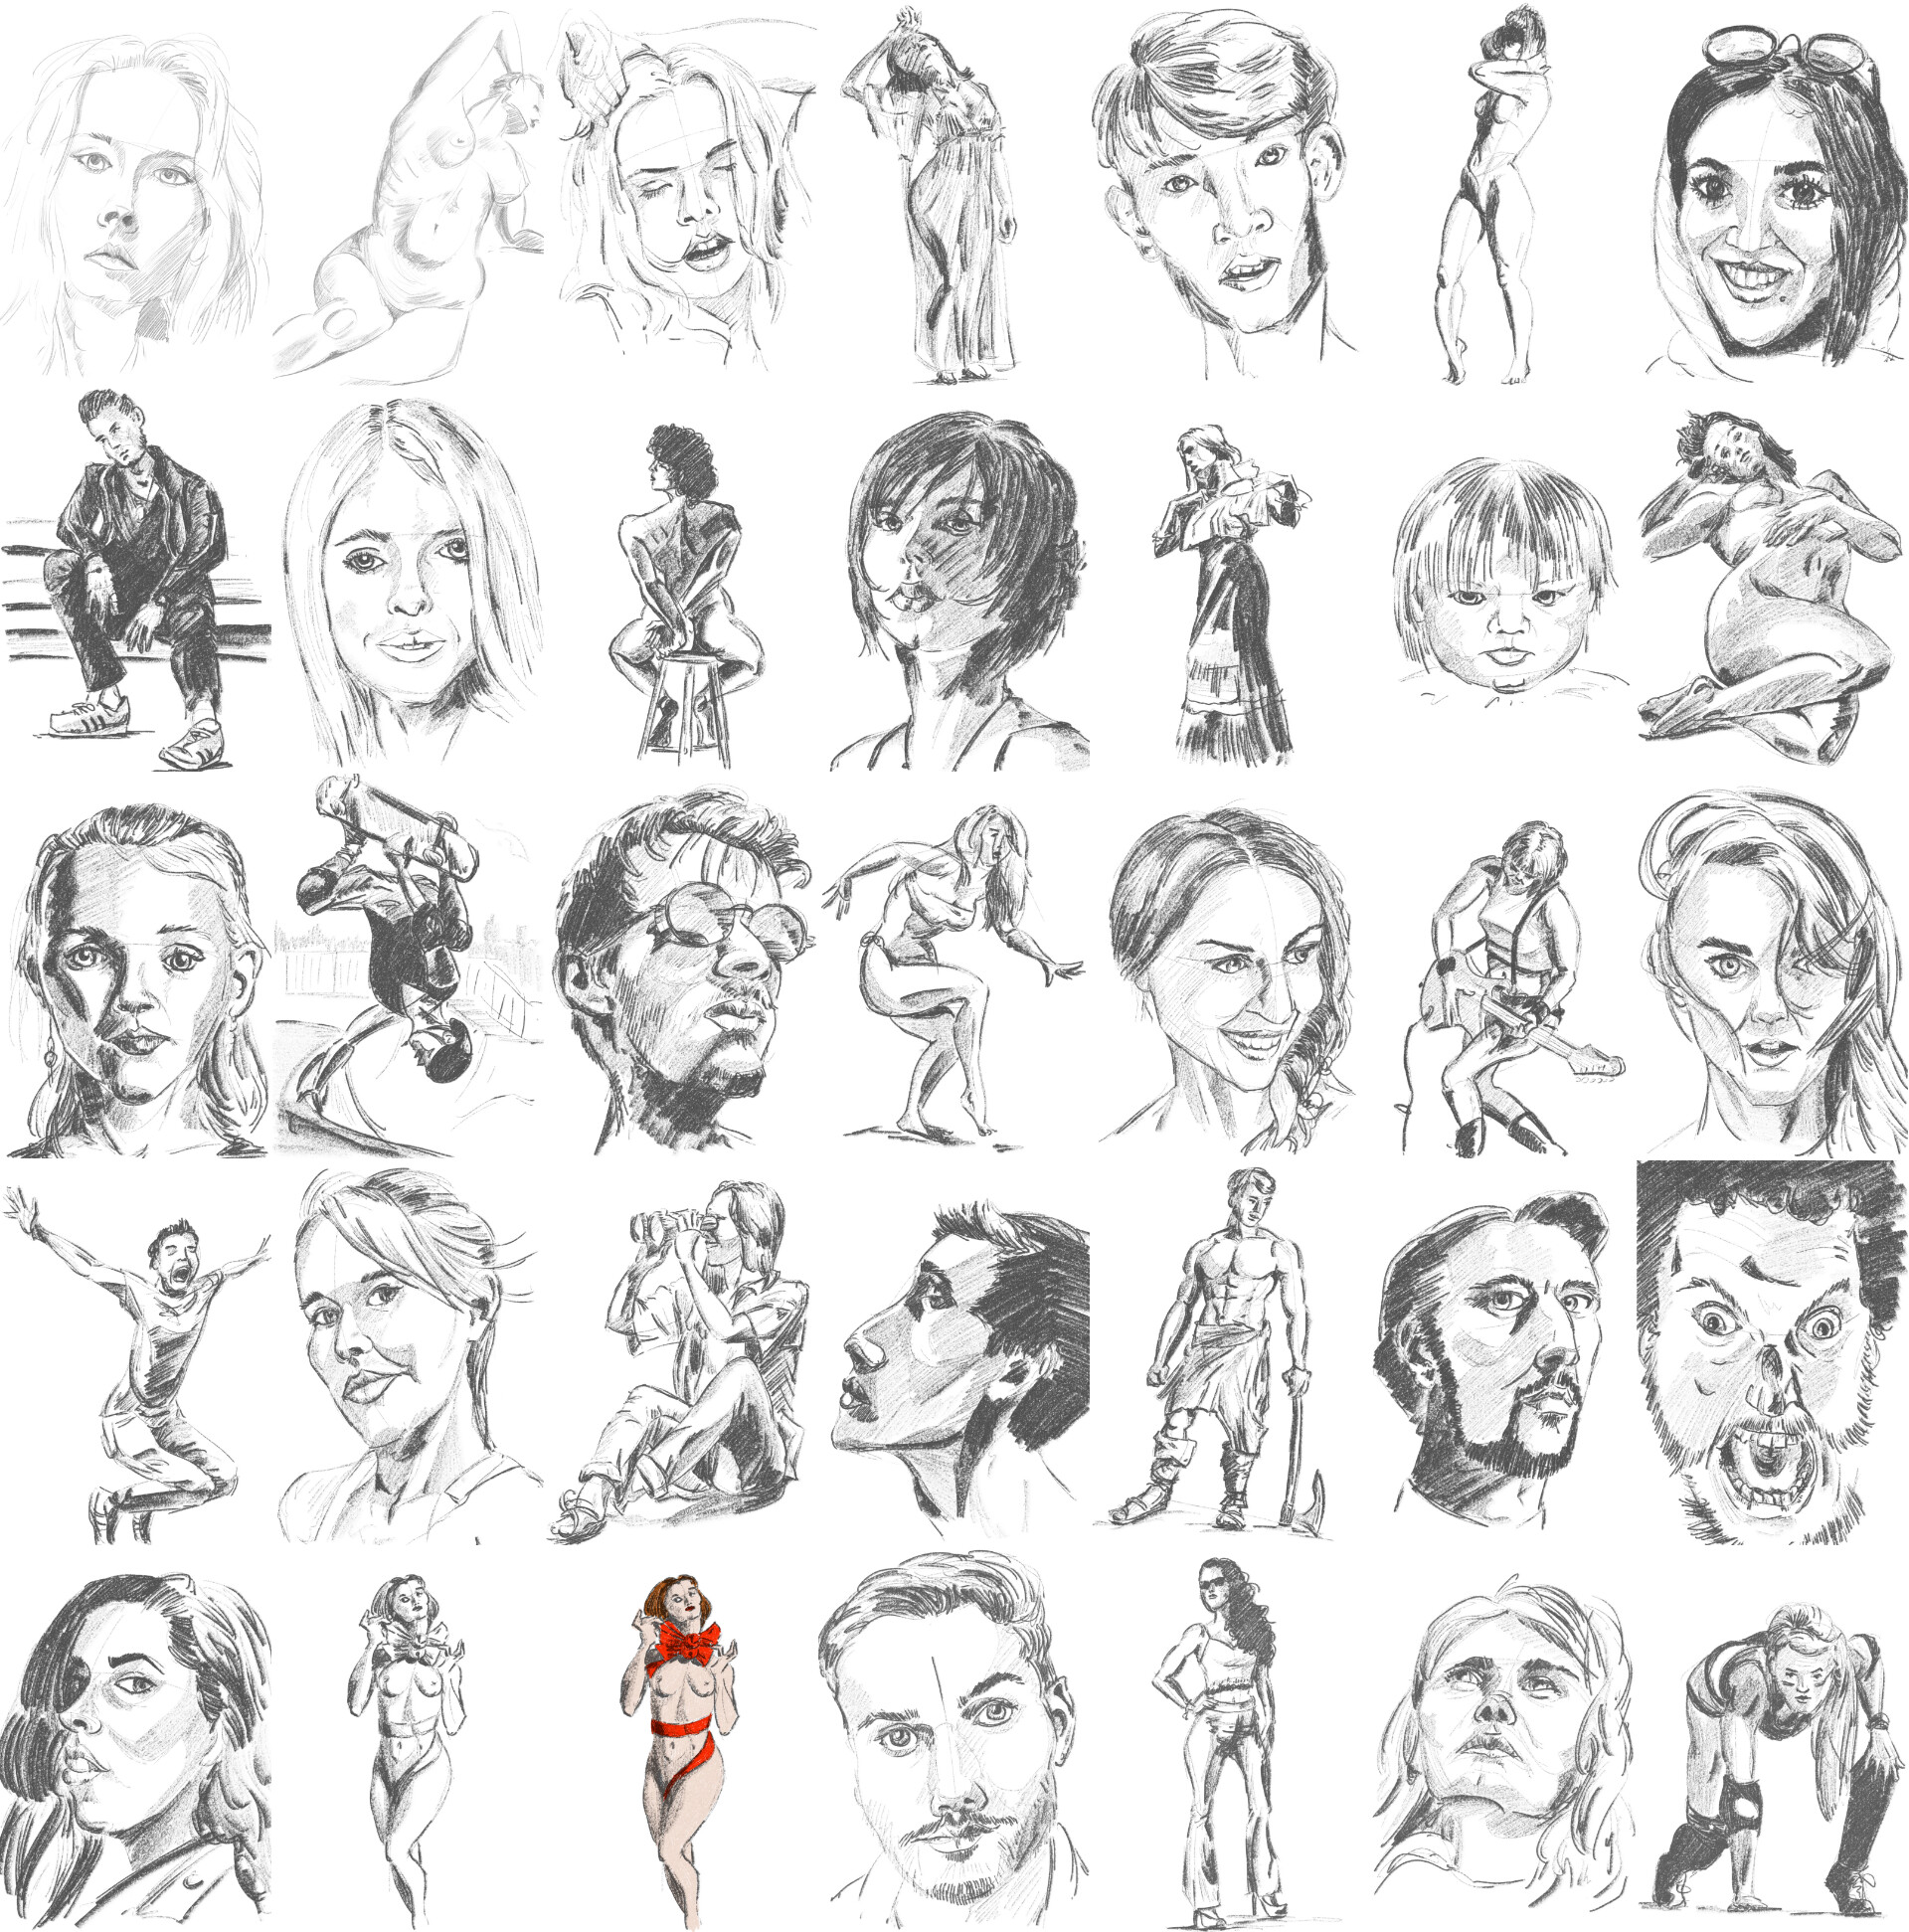 Drawing The Female Figure  Figure drawing female, Human figure drawing,  Figure drawing